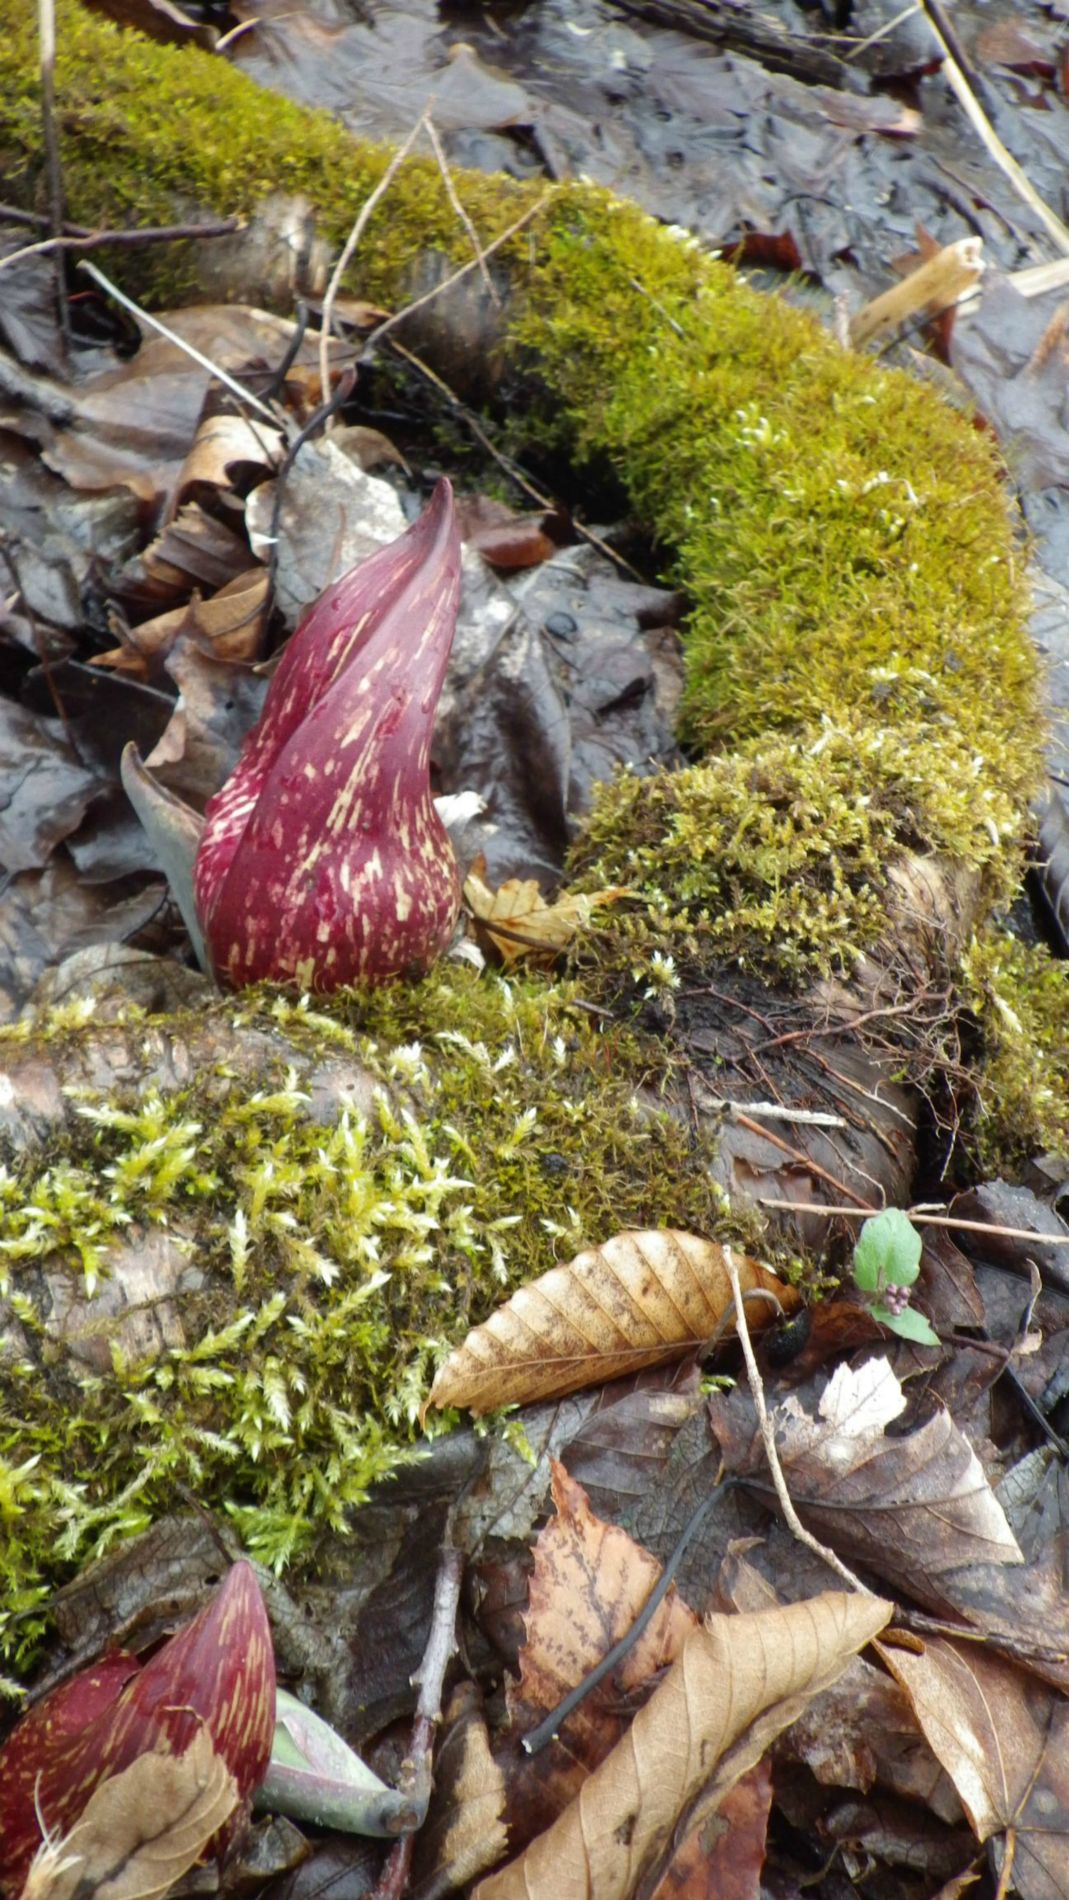 Skunk Cabbage emerging beside a moss covered log.